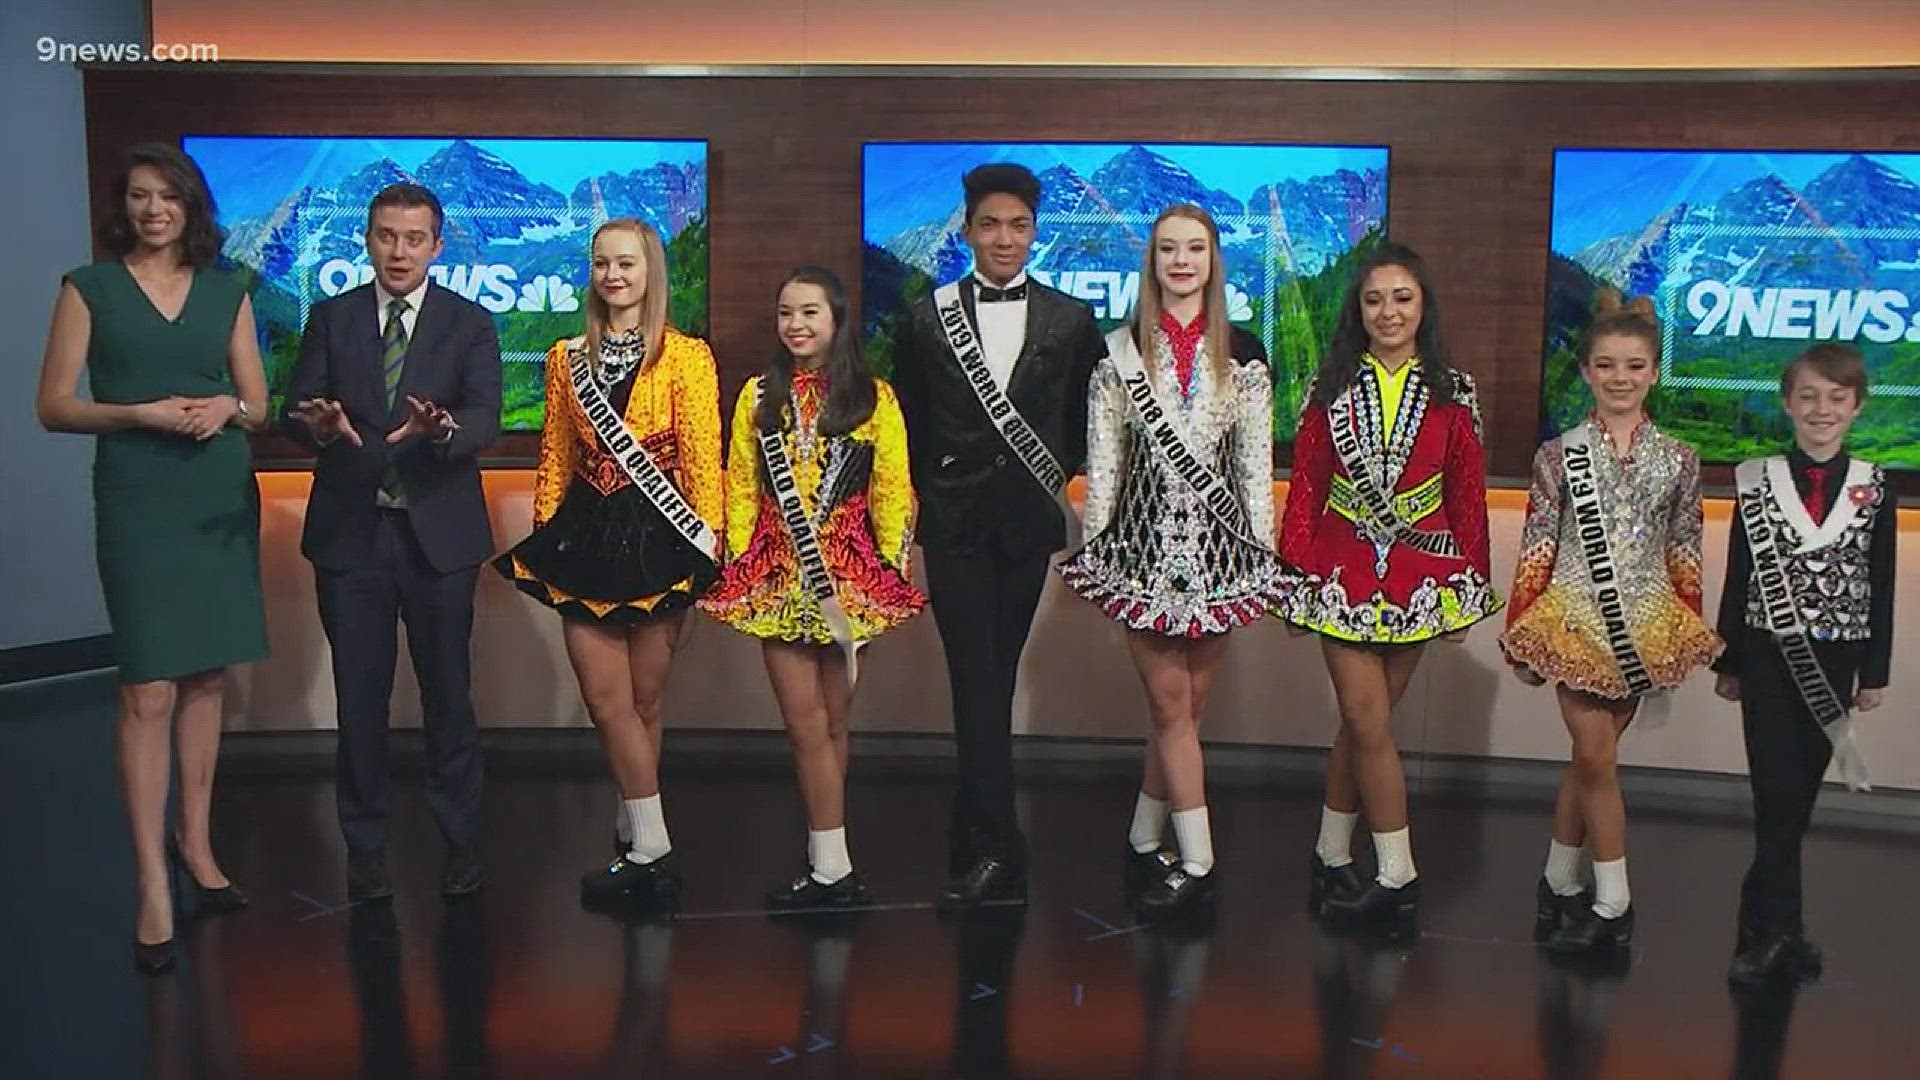 The McTeggart Irish Dancers from boulder, won first place in Denver 2018 St. Patrick'a Say parade and are competing nationally this year.